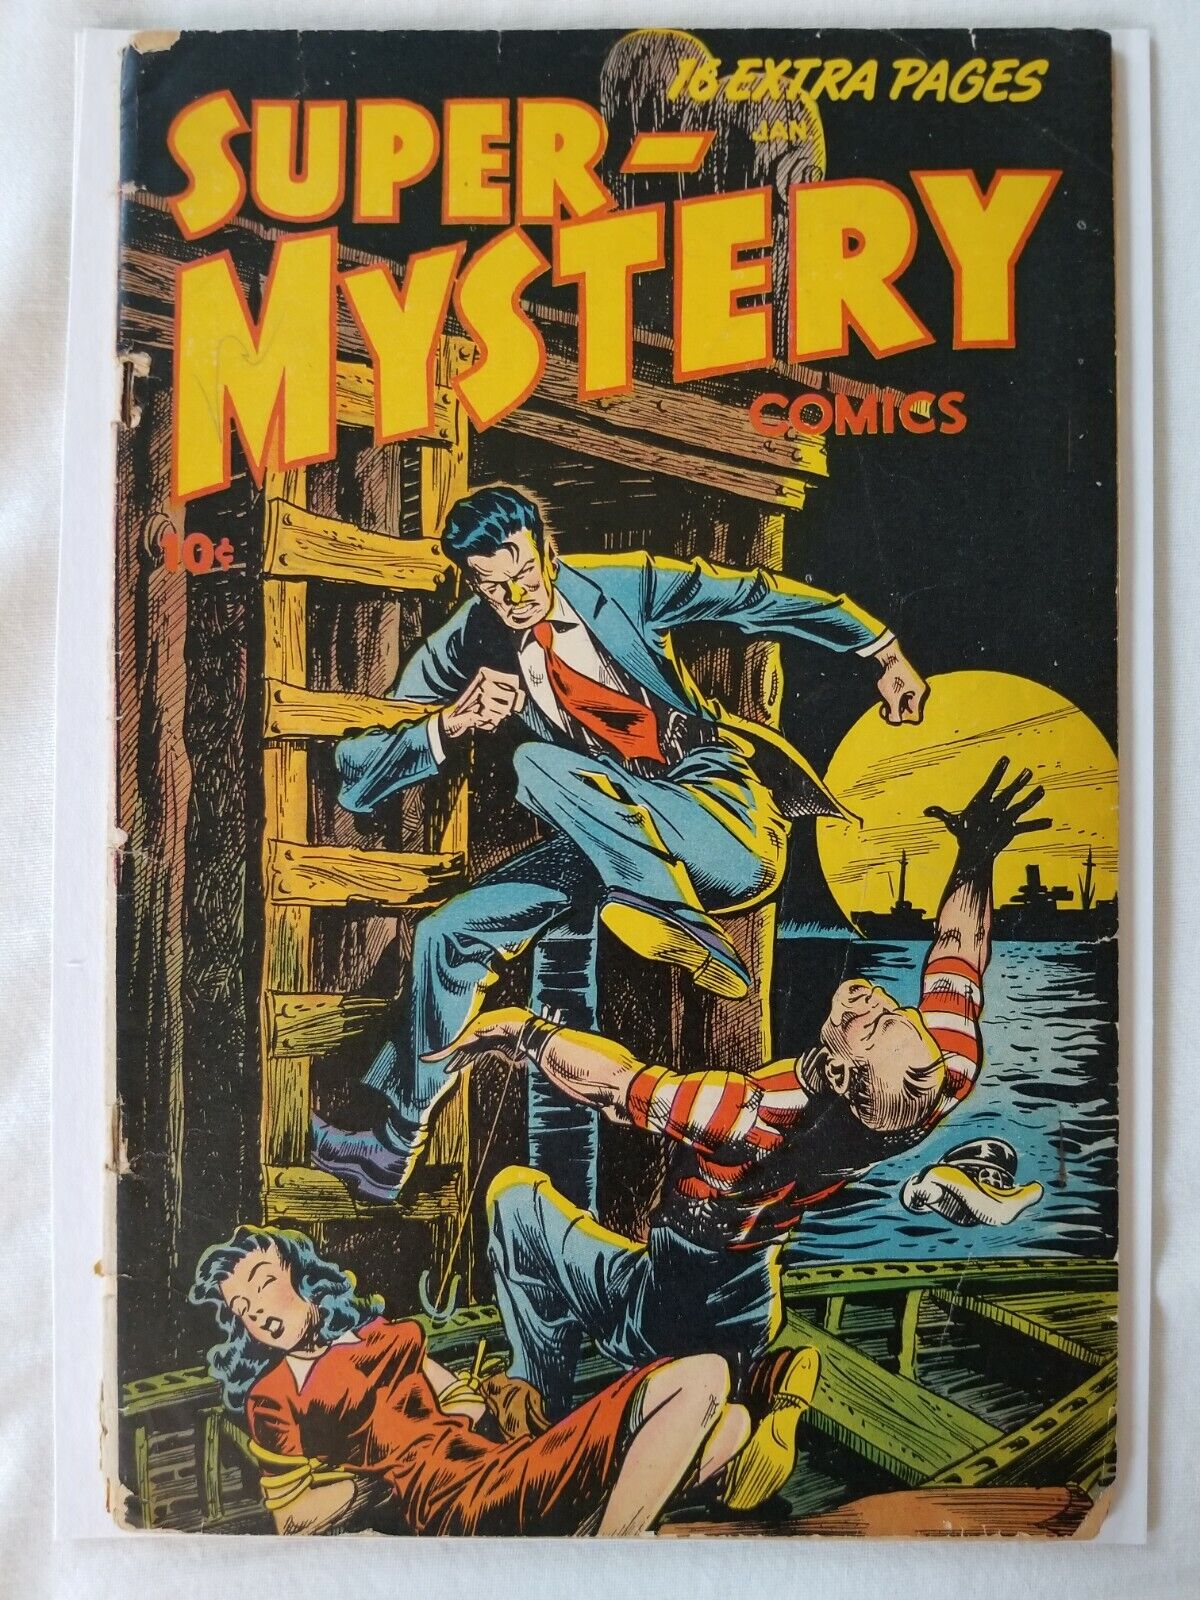 Super-Mystery Comics Volume 7 #3 - Check out our other comic listings